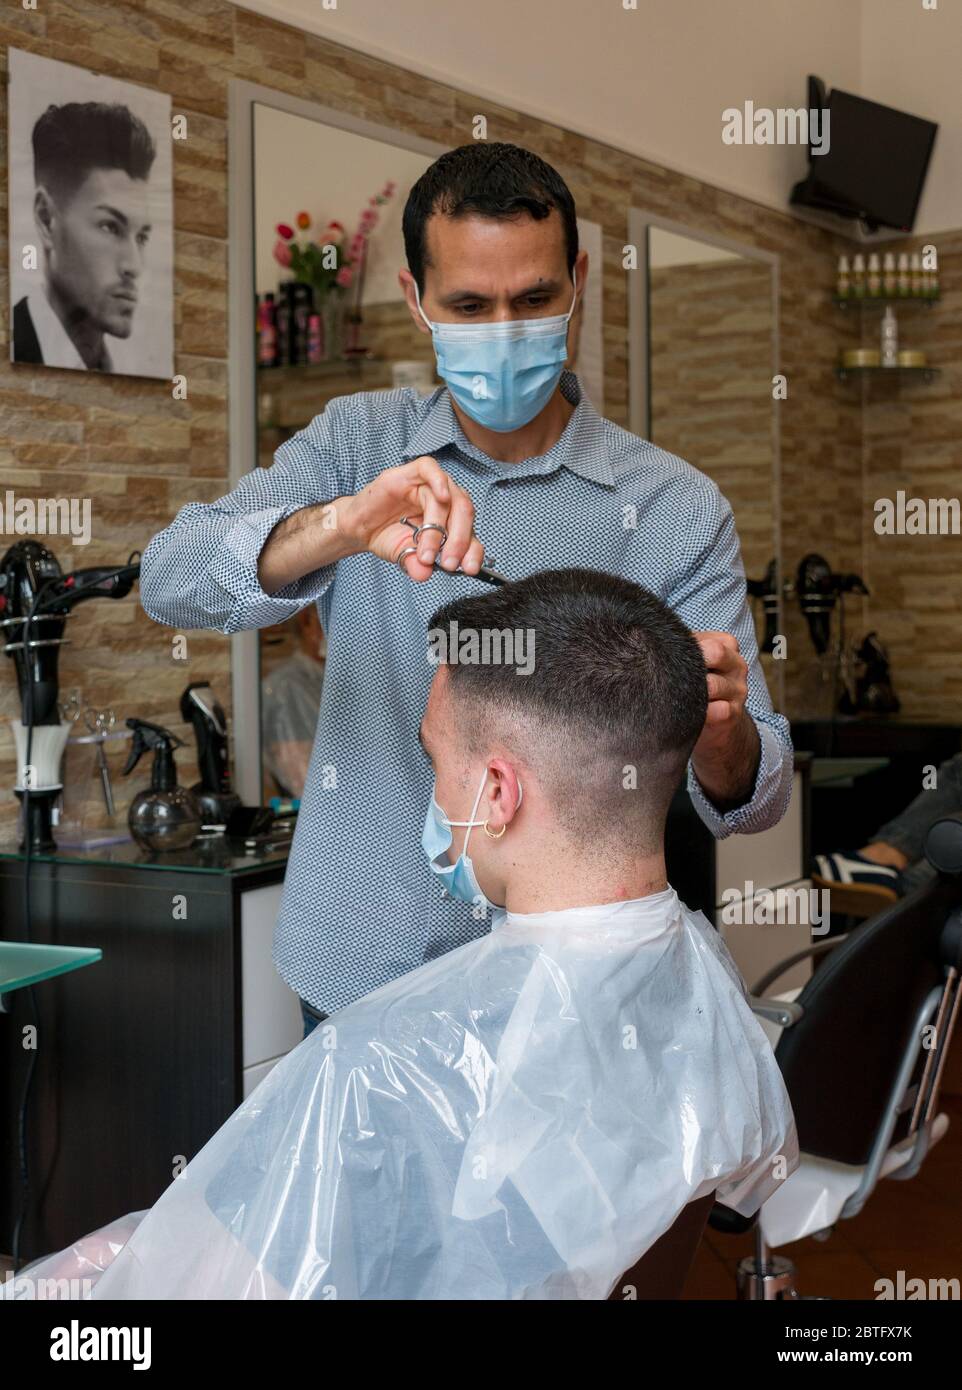 Florence, Italy - 2020, May 18: Boy at the barber shop get a haircut wearing protective mask, during Covid-19 lockdown. Stock Photo